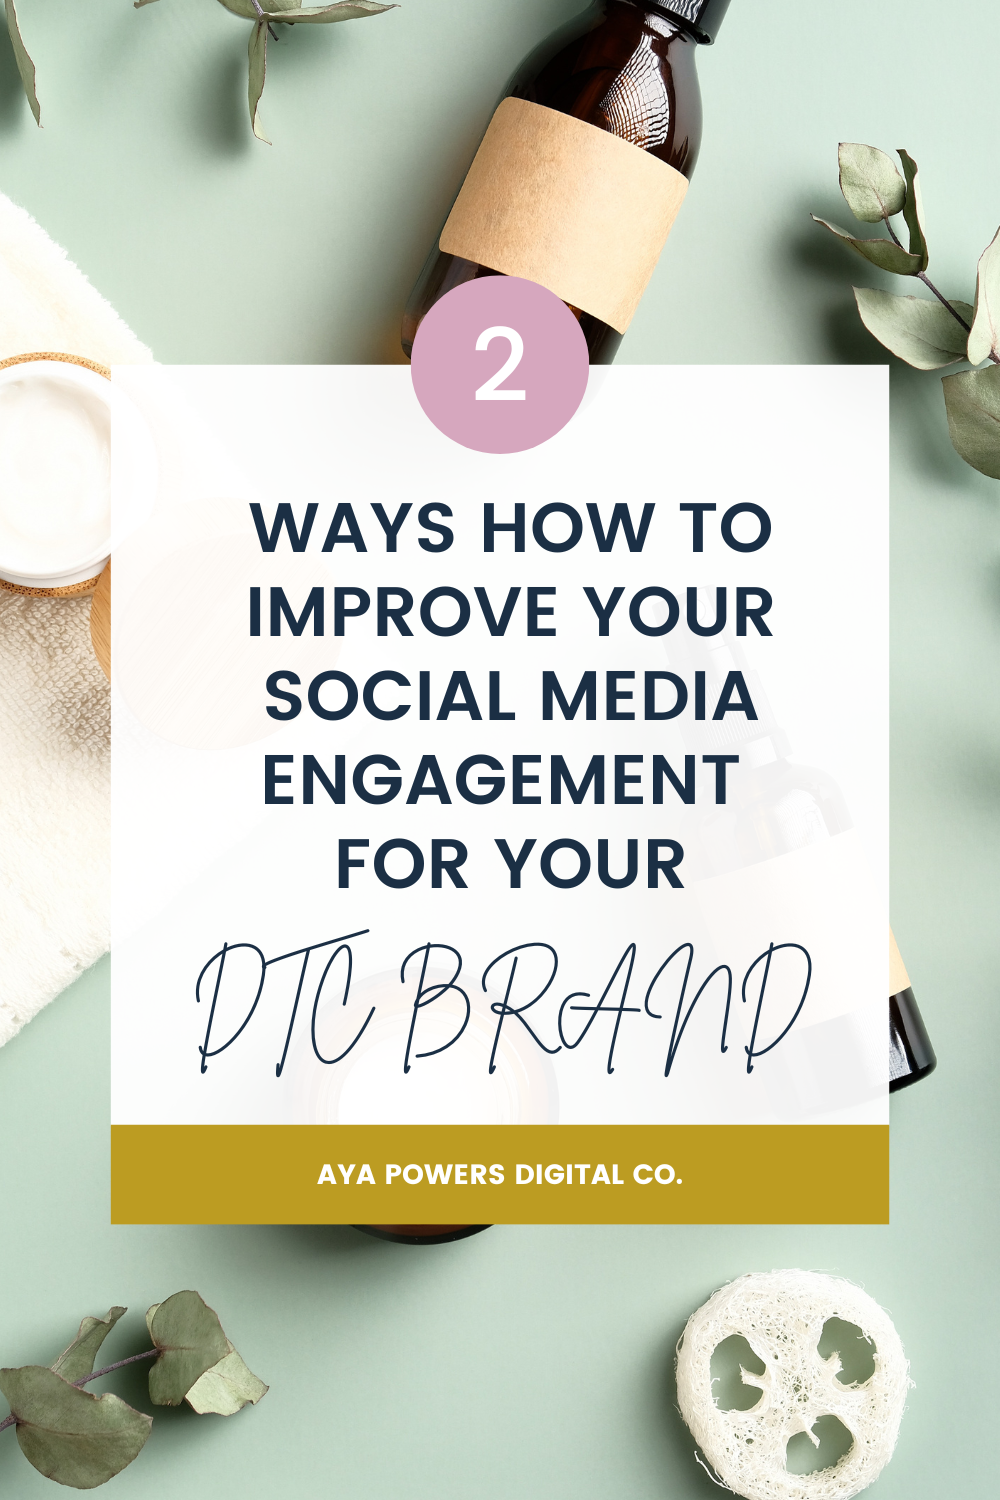 You could be doing a completely wrong approach to engagement!